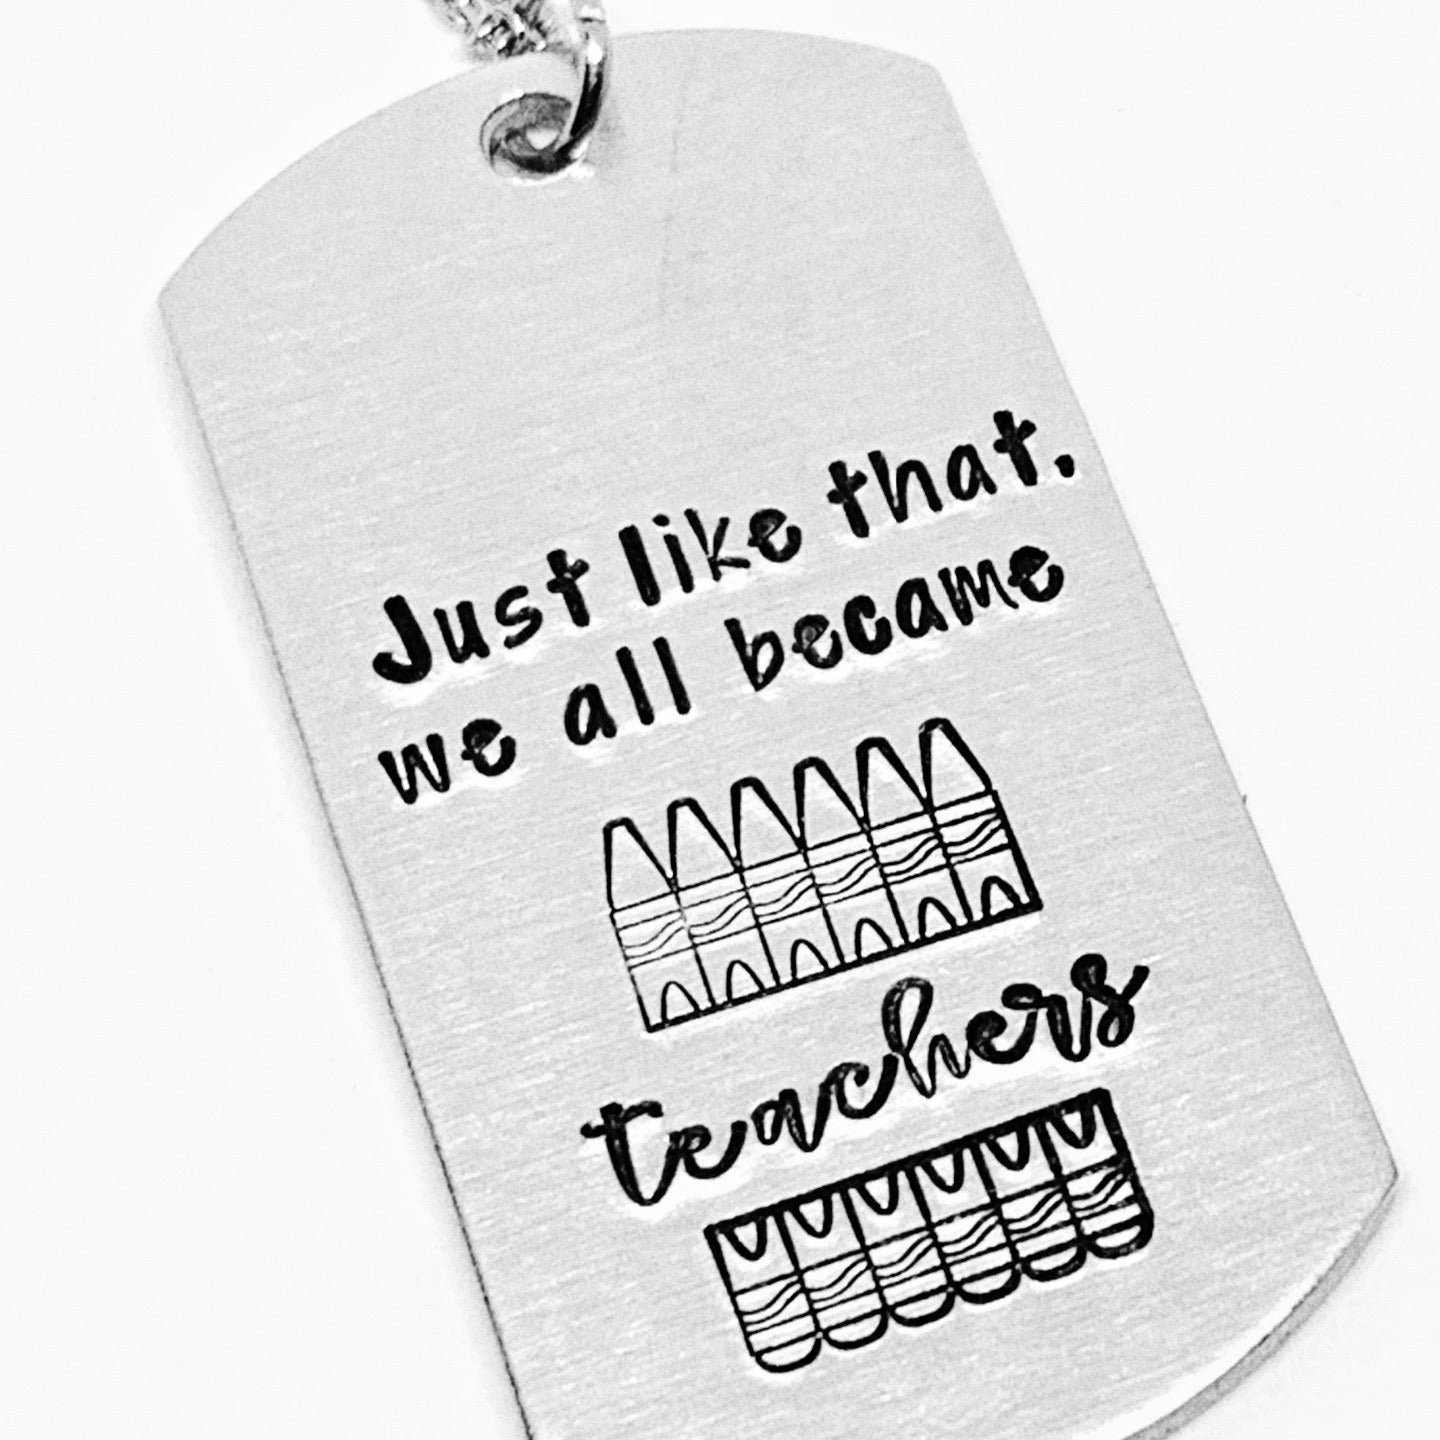 Just like that we all became teachers - Hand Stamped Key Ring / Necklace / Zipper Pull